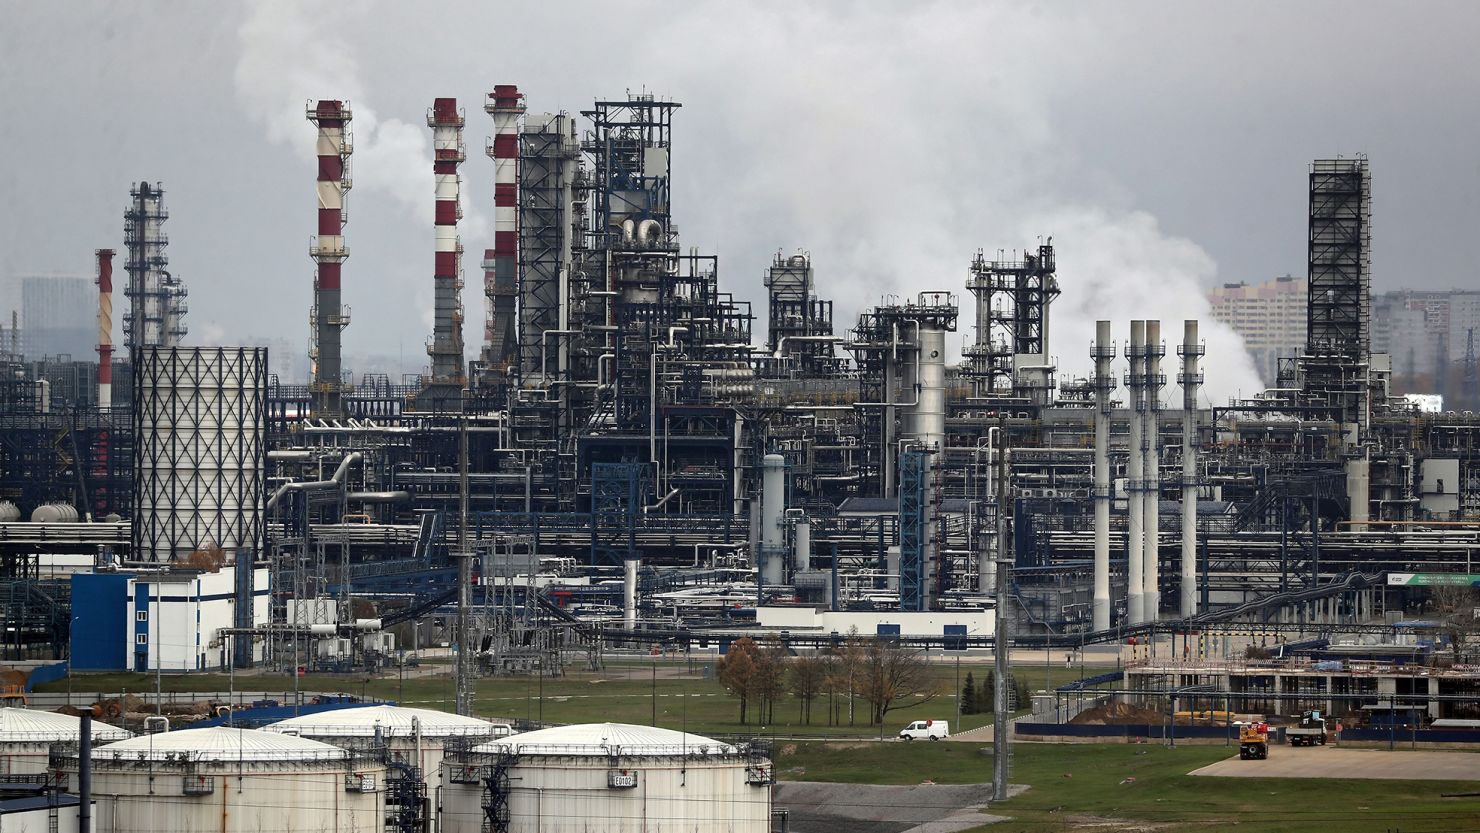 A Gazpromneft petroleum refinery in Moscow, Russia on October 27, 2022. 